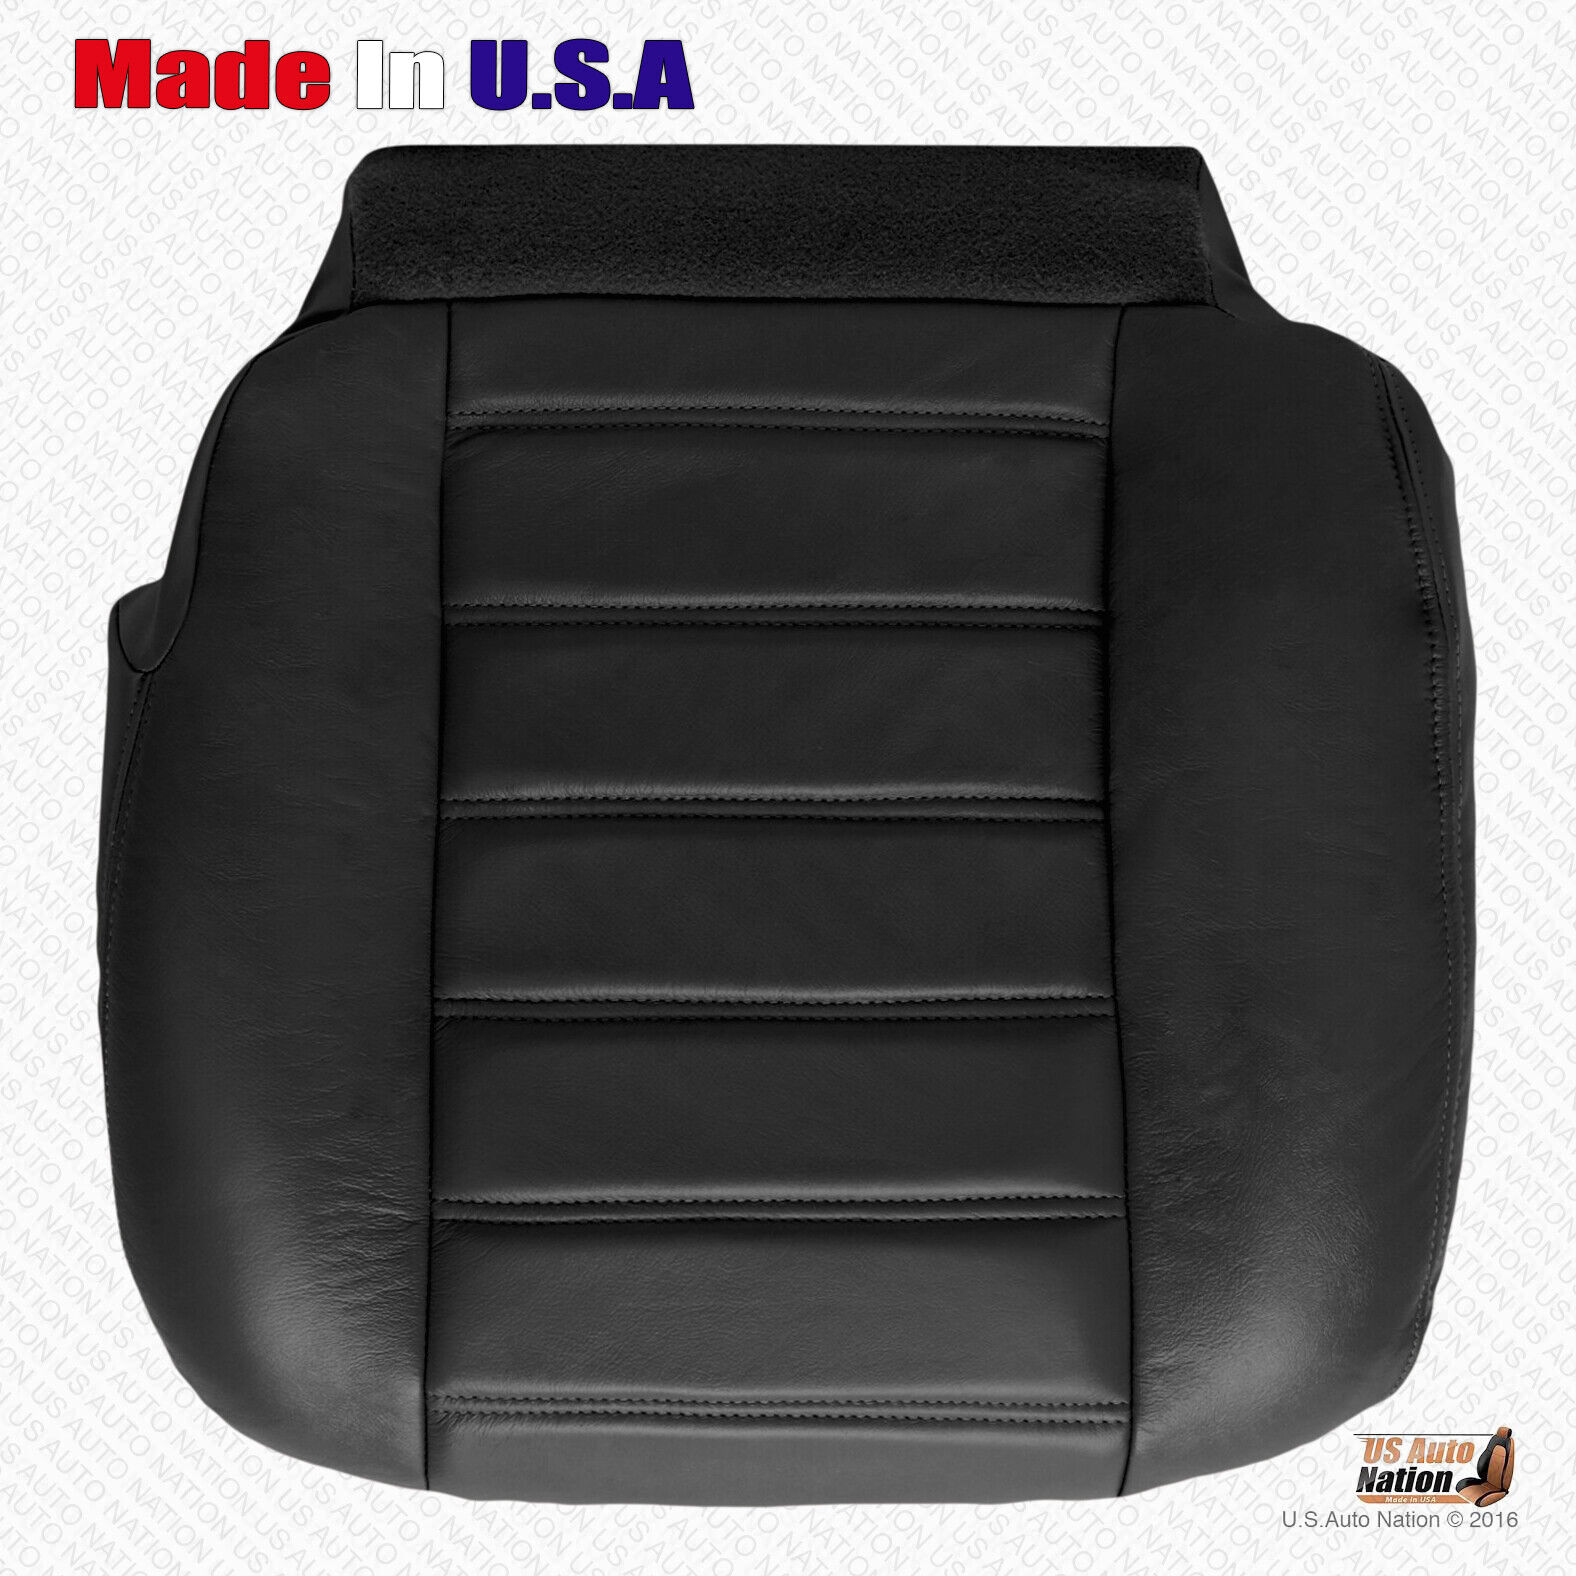 2005-2006 Hummer H2 AWD Driver Side Bottom Replacement Leather Seat Cover Black